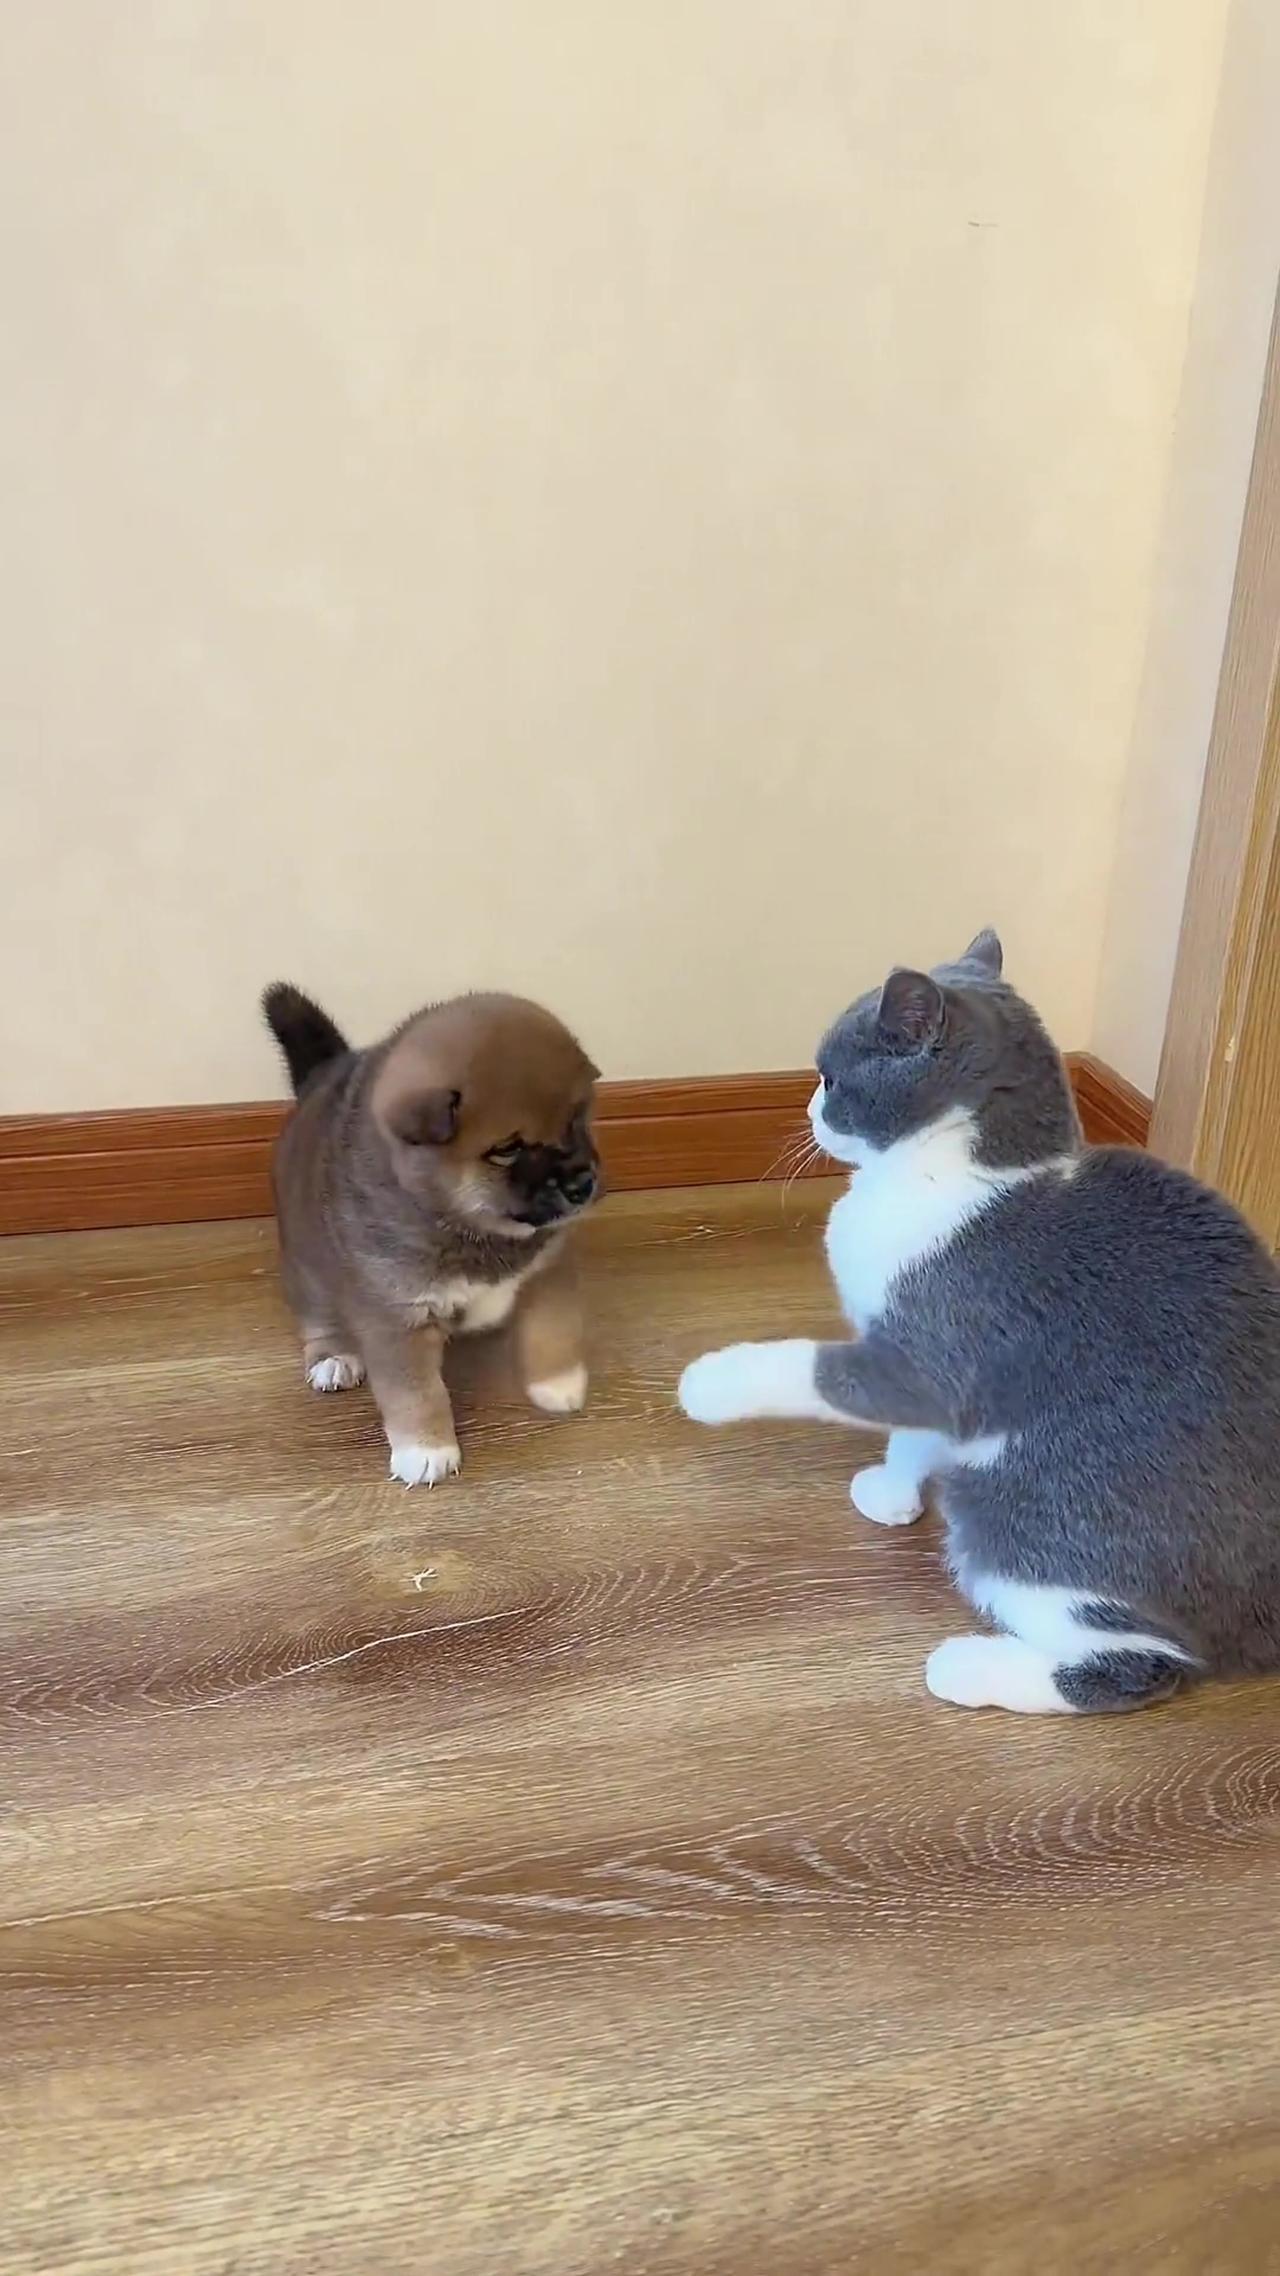 Cat and Dog just don't agree with each other